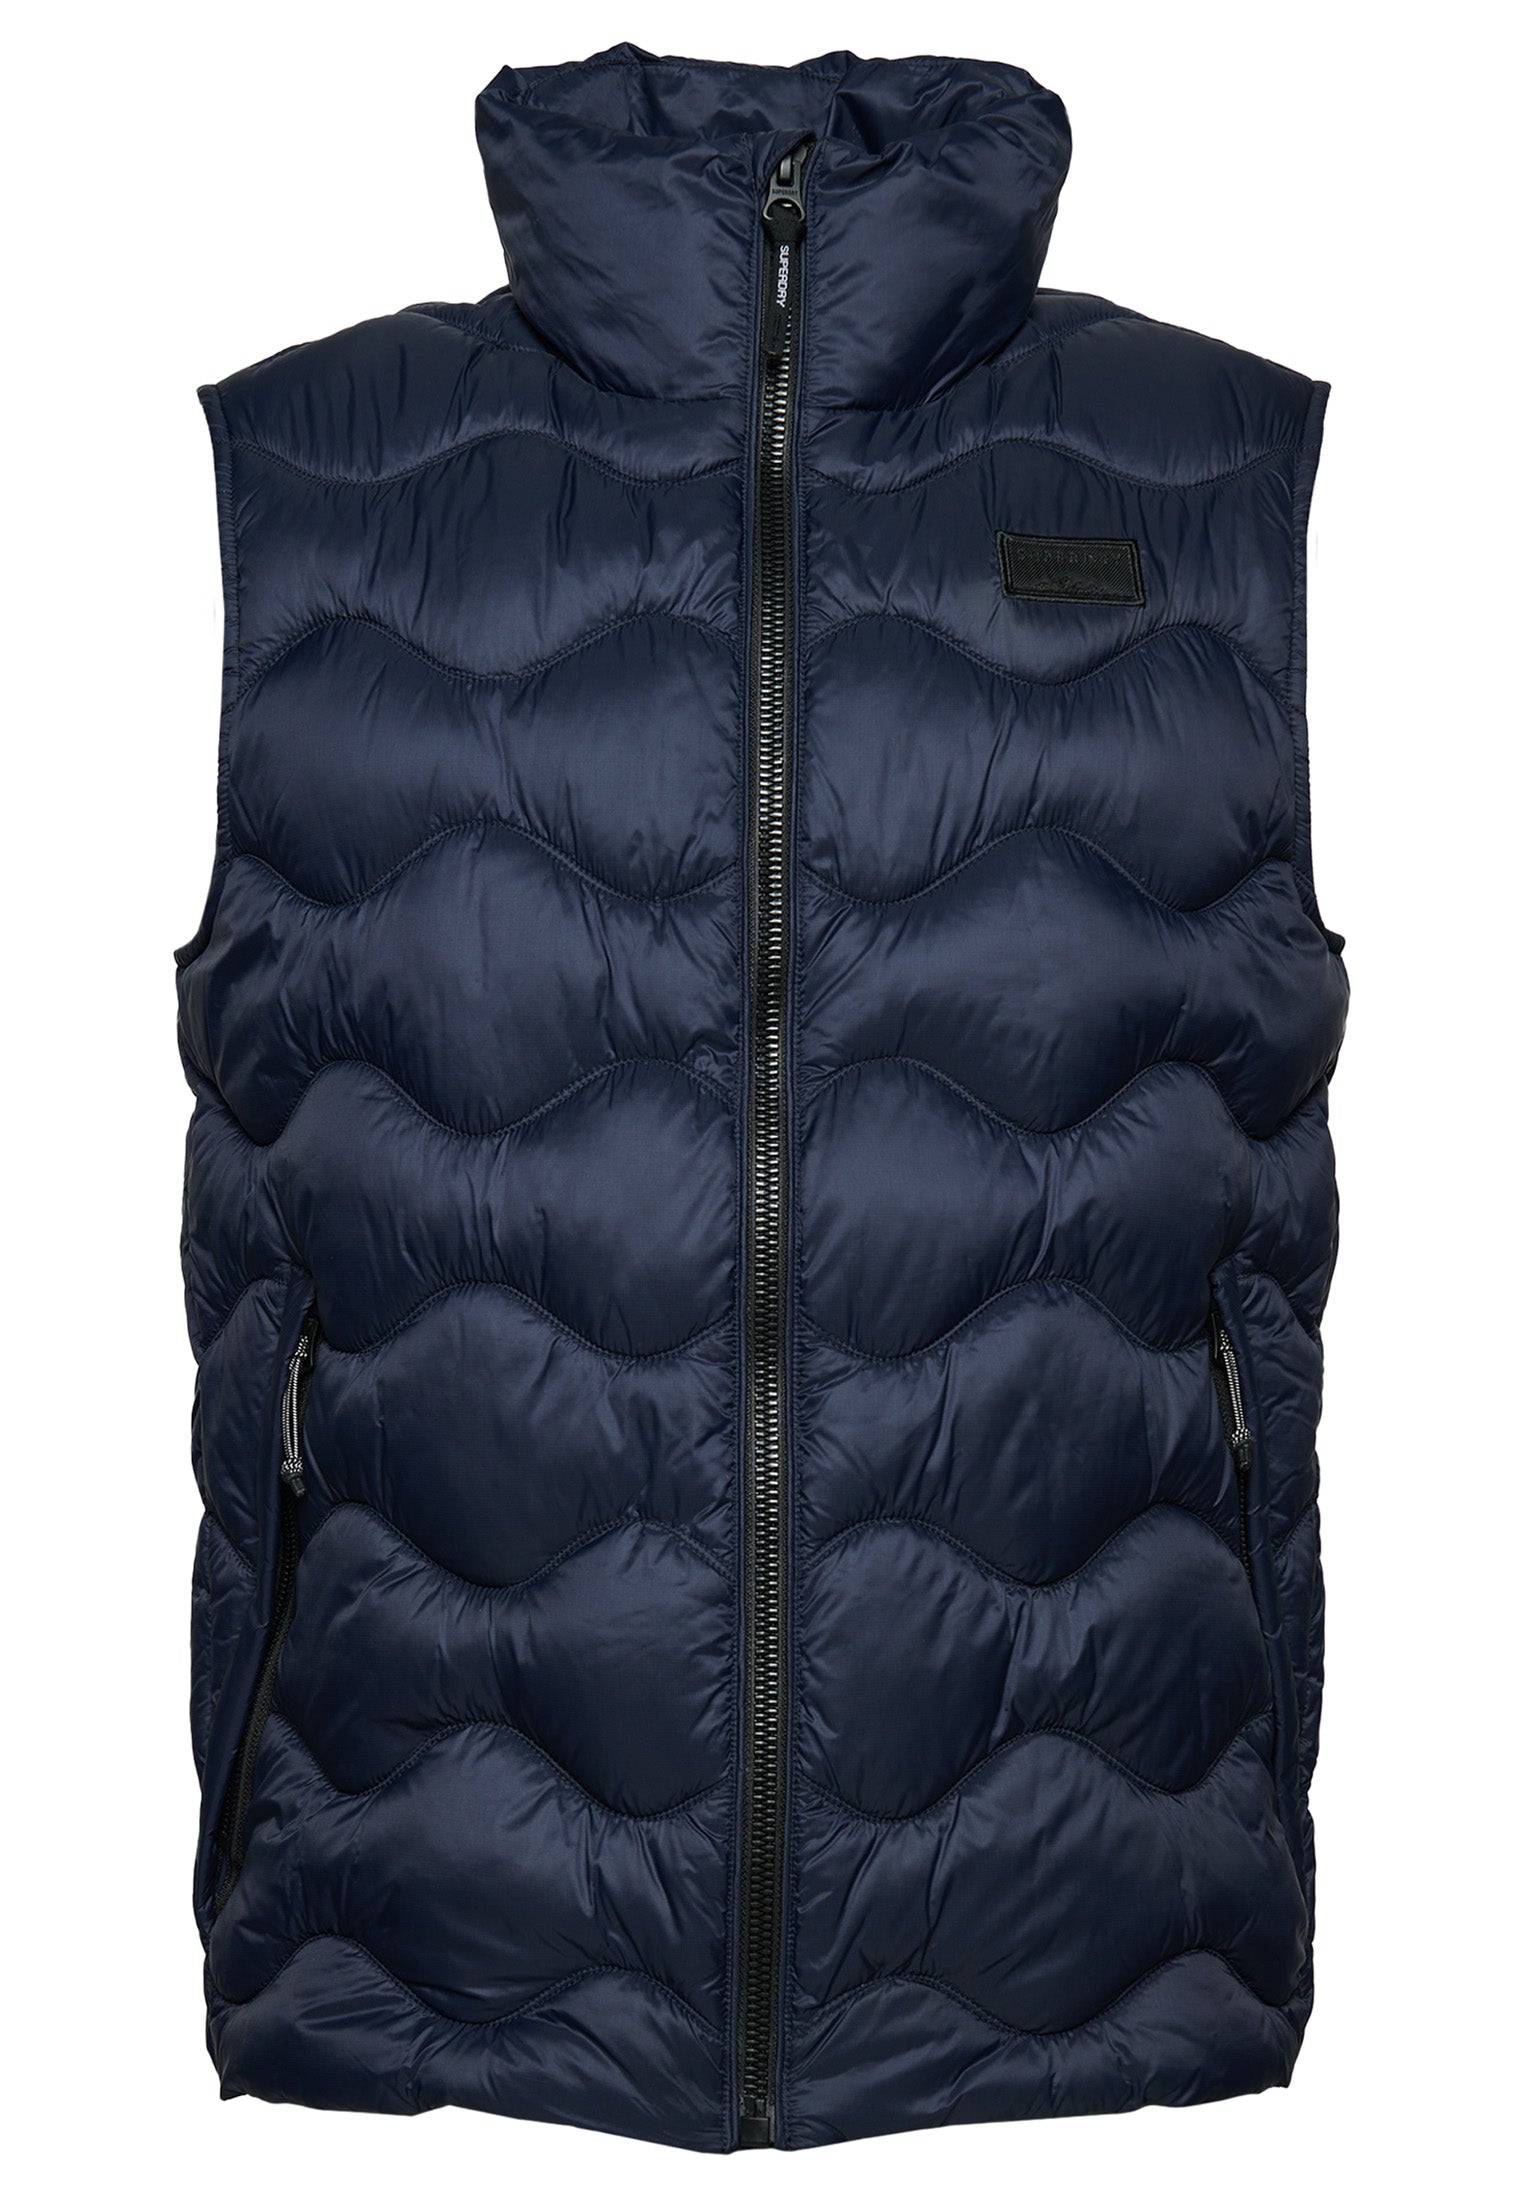 Studios Expedition Eclipse Navy Gilet-Close up view